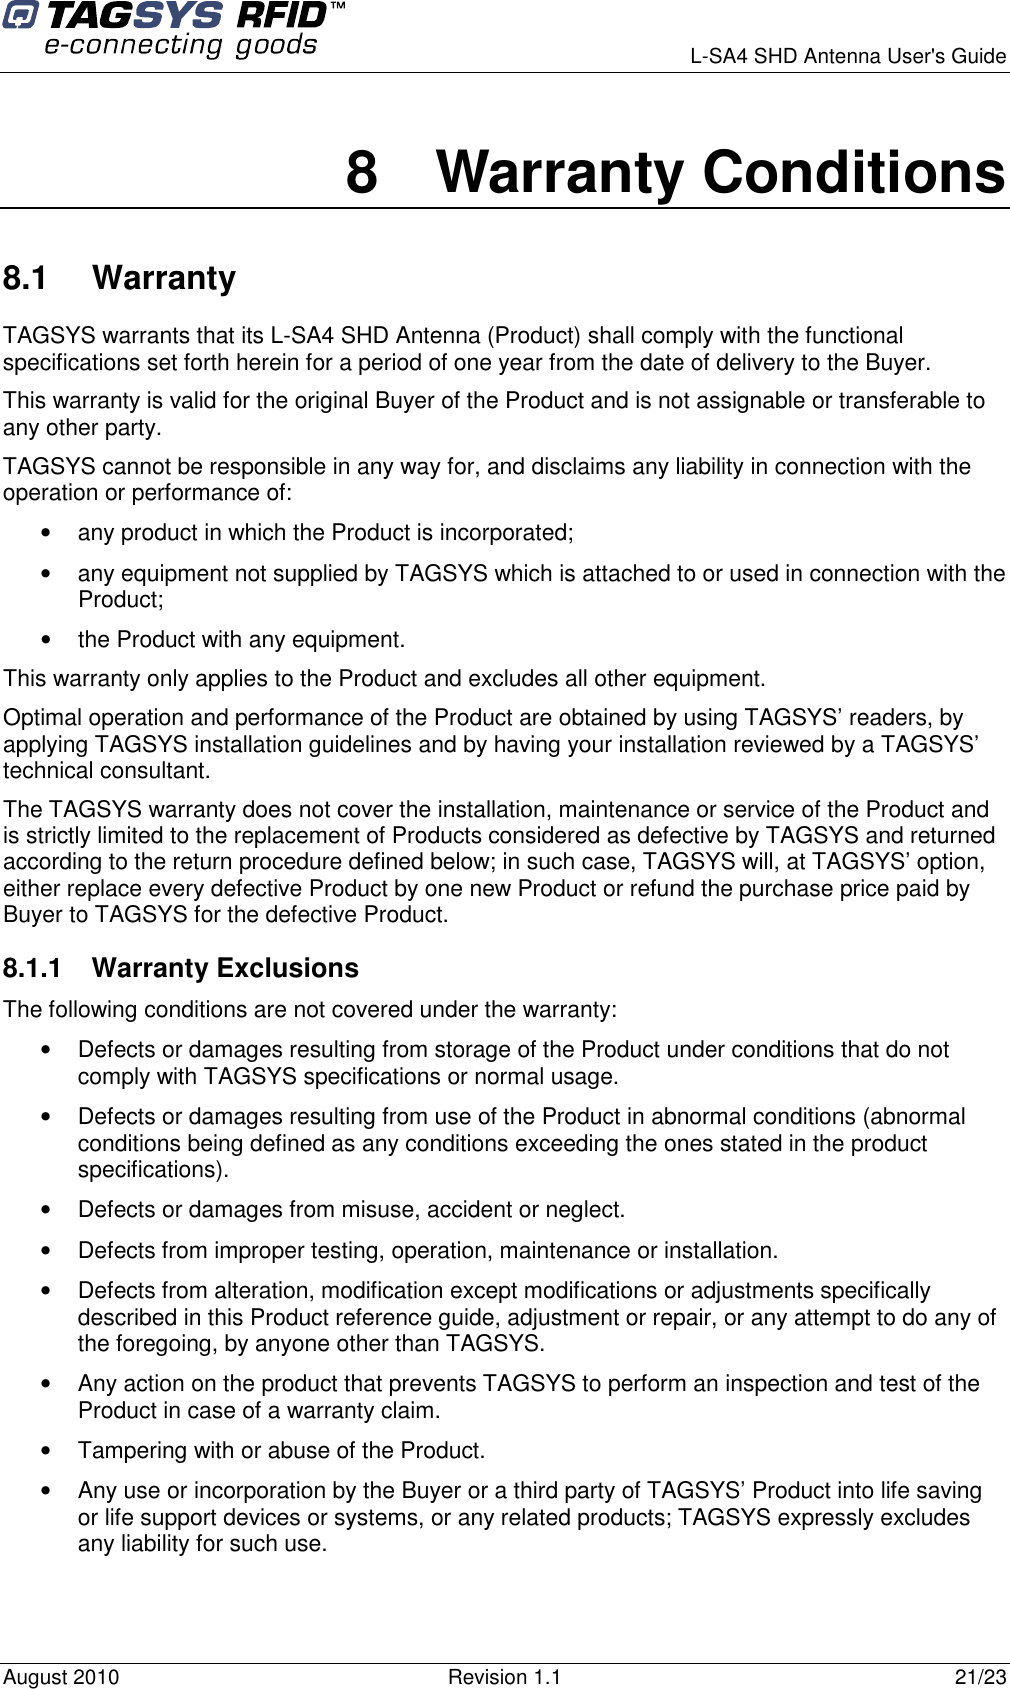      L-SA4 SHD Antenna User&apos;s Guide August 2010  Revision 1.1  21/23 8  Warranty Conditions 8.1  Warranty TAGSYS warrants that its L-SA4 SHD Antenna (Product) shall comply with the functional specifications set forth herein for a period of one year from the date of delivery to the Buyer. This warranty is valid for the original Buyer of the Product and is not assignable or transferable to any other party. TAGSYS cannot be responsible in any way for, and disclaims any liability in connection with the operation or performance of: •  any product in which the Product is incorporated; •  any equipment not supplied by TAGSYS which is attached to or used in connection with the Product; •  the Product with any equipment. This warranty only applies to the Product and excludes all other equipment. Optimal operation and performance of the Product are obtained by using TAGSYS’ readers, by applying TAGSYS installation guidelines and by having your installation reviewed by a TAGSYS’ technical consultant. The TAGSYS warranty does not cover the installation, maintenance or service of the Product and is strictly limited to the replacement of Products considered as defective by TAGSYS and returned according to the return procedure defined below; in such case, TAGSYS will, at TAGSYS’ option, either replace every defective Product by one new Product or refund the purchase price paid by Buyer to TAGSYS for the defective Product. 8.1.1  Warranty Exclusions  The following conditions are not covered under the warranty: •  Defects or damages resulting from storage of the Product under conditions that do not comply with TAGSYS specifications or normal usage. •  Defects or damages resulting from use of the Product in abnormal conditions (abnormal conditions being defined as any conditions exceeding the ones stated in the product specifications). •  Defects or damages from misuse, accident or neglect. •  Defects from improper testing, operation, maintenance or installation. •  Defects from alteration, modification except modifications or adjustments specifically described in this Product reference guide, adjustment or repair, or any attempt to do any of the foregoing, by anyone other than TAGSYS. •  Any action on the product that prevents TAGSYS to perform an inspection and test of the Product in case of a warranty claim. •  Tampering with or abuse of the Product. •  Any use or incorporation by the Buyer or a third party of TAGSYS’ Product into life saving or life support devices or systems, or any related products; TAGSYS expressly excludes any liability for such use. 